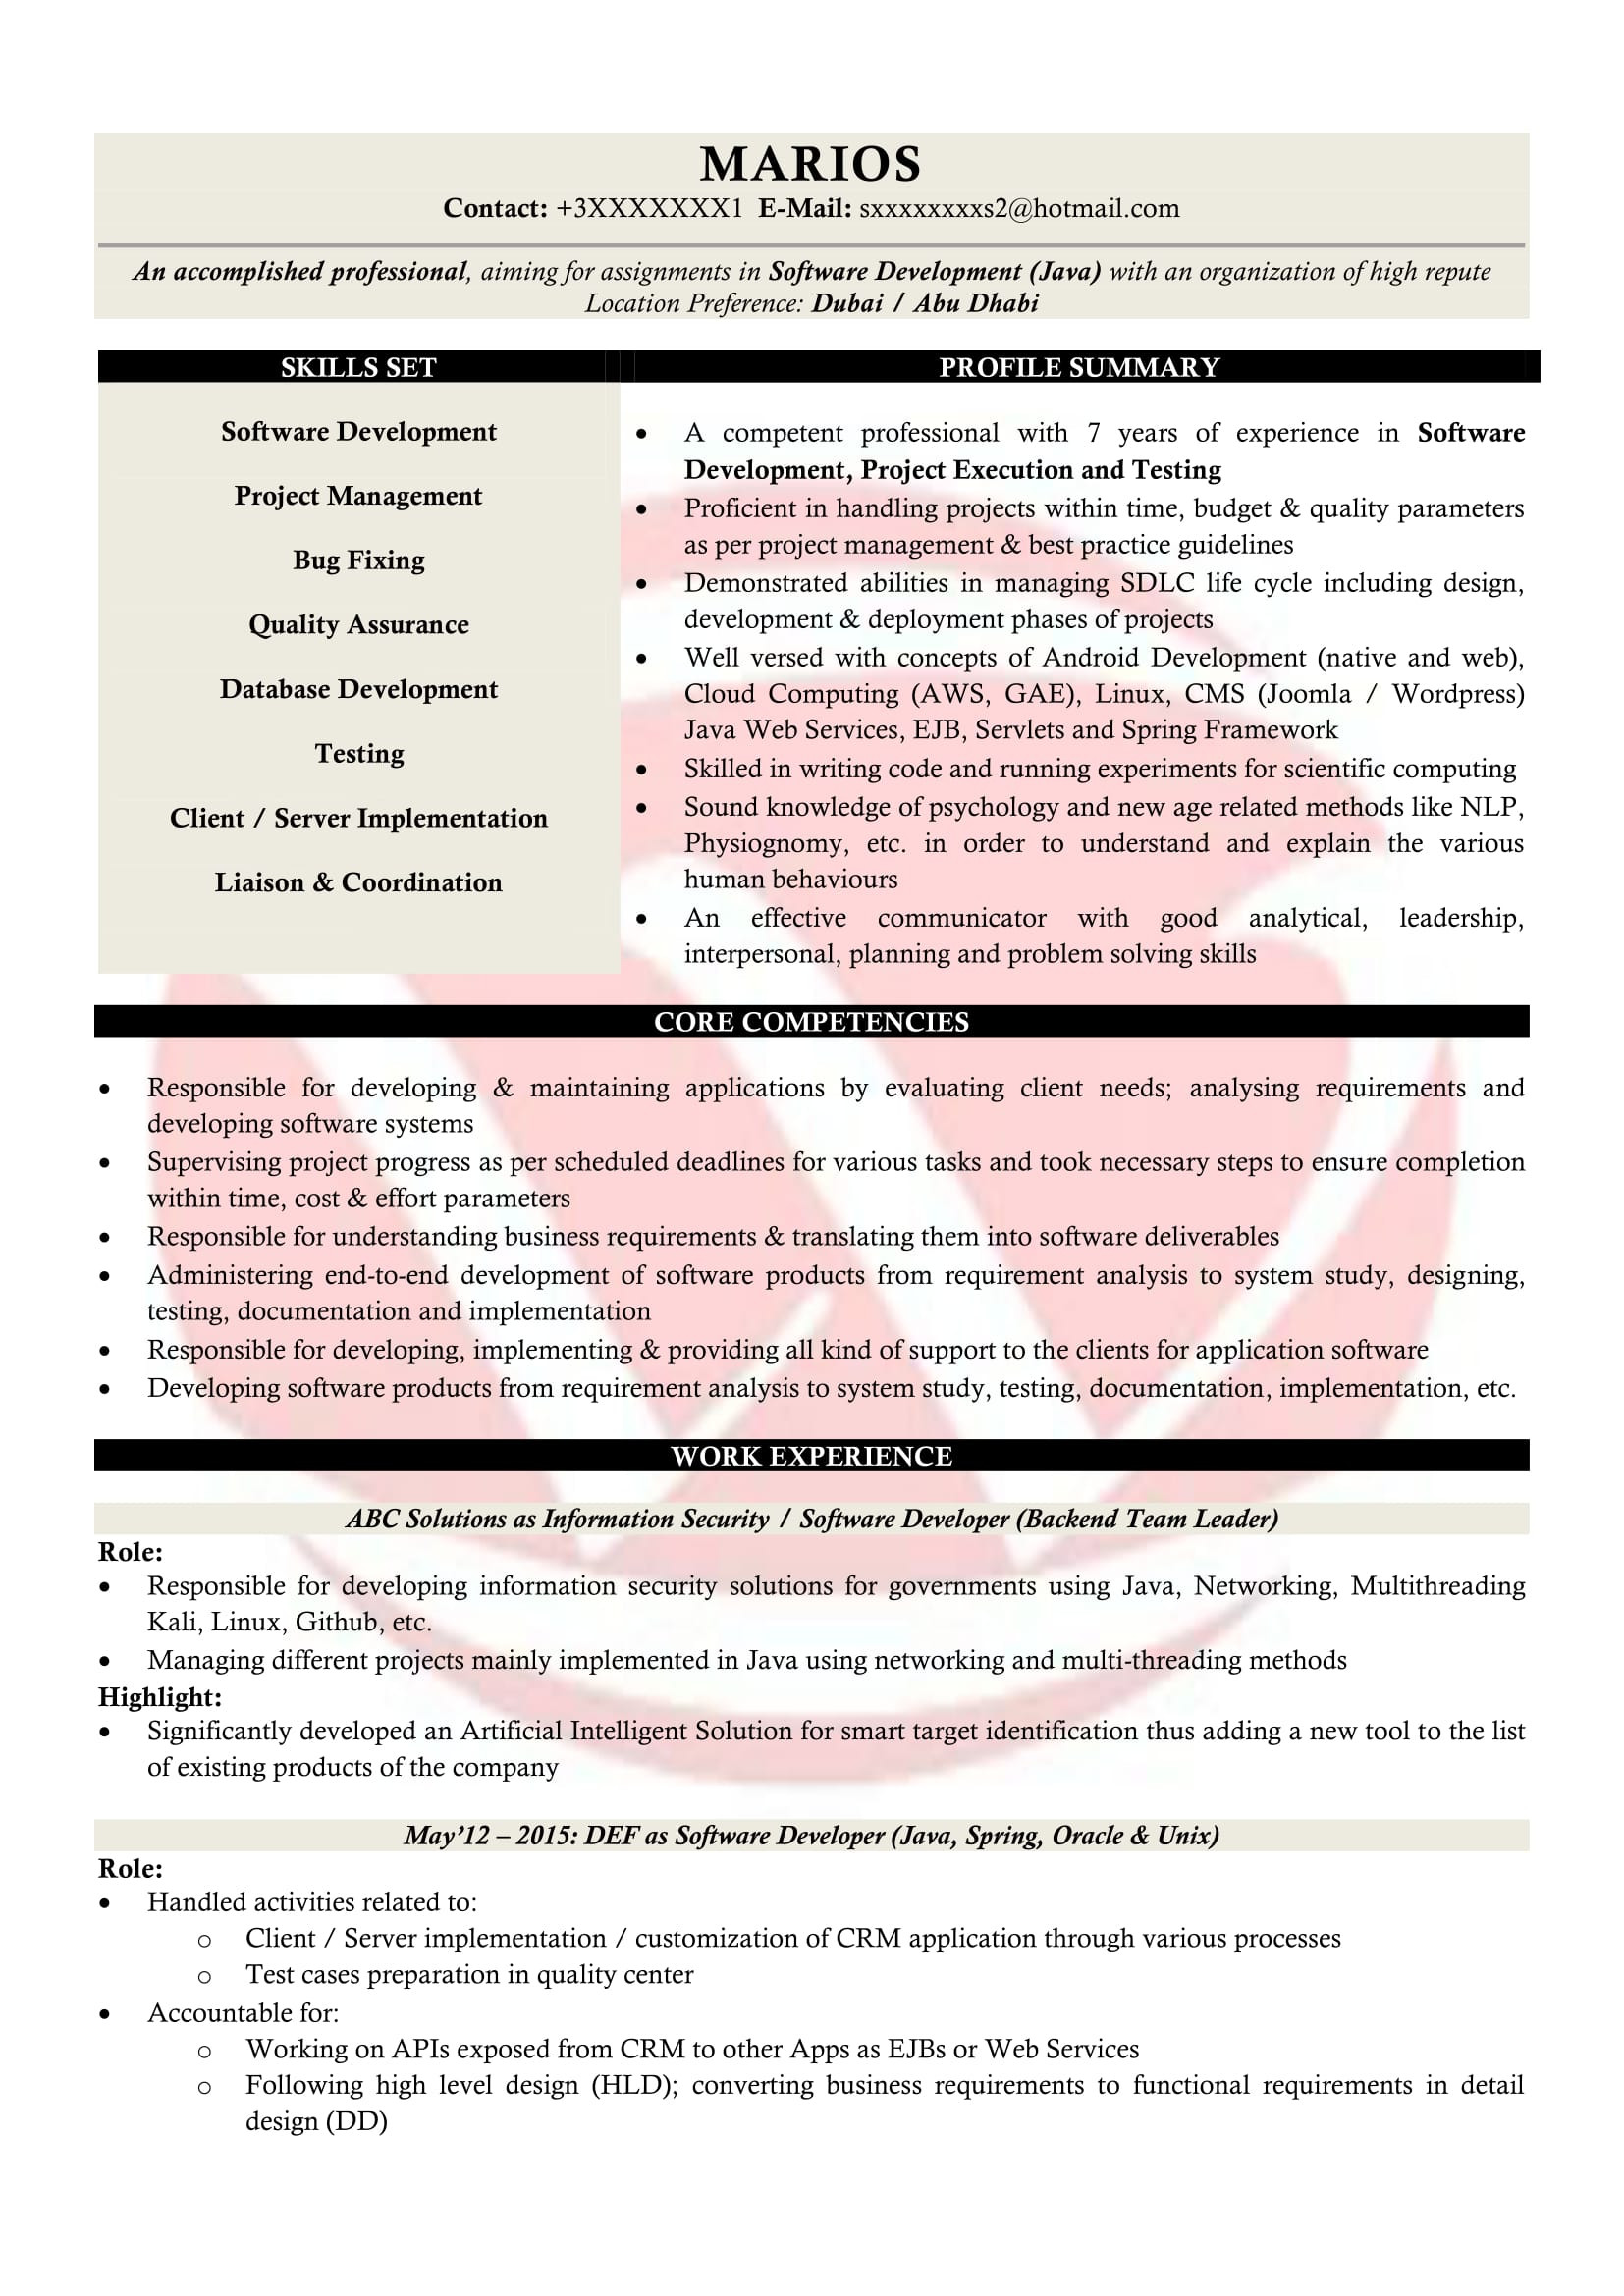 Sample Resume for Experienced Core Java Developer Java Developer Sample Resumes, Download Resume format Templates!